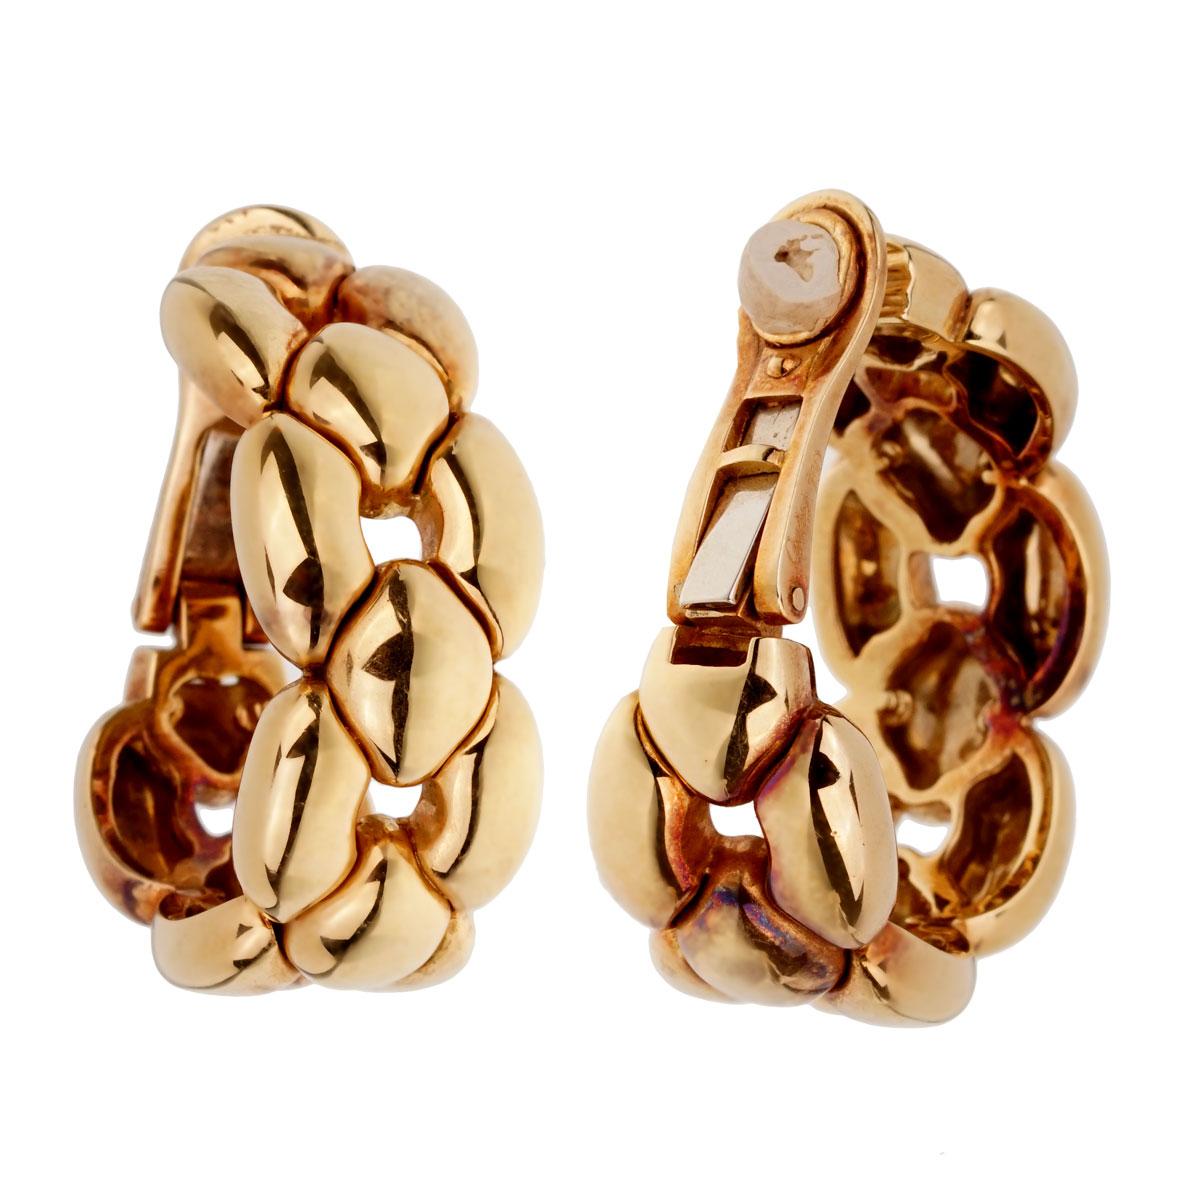 A magnificent set of Cartier hoop earrings crafted in 18k yellow gold. The earrings measure .50